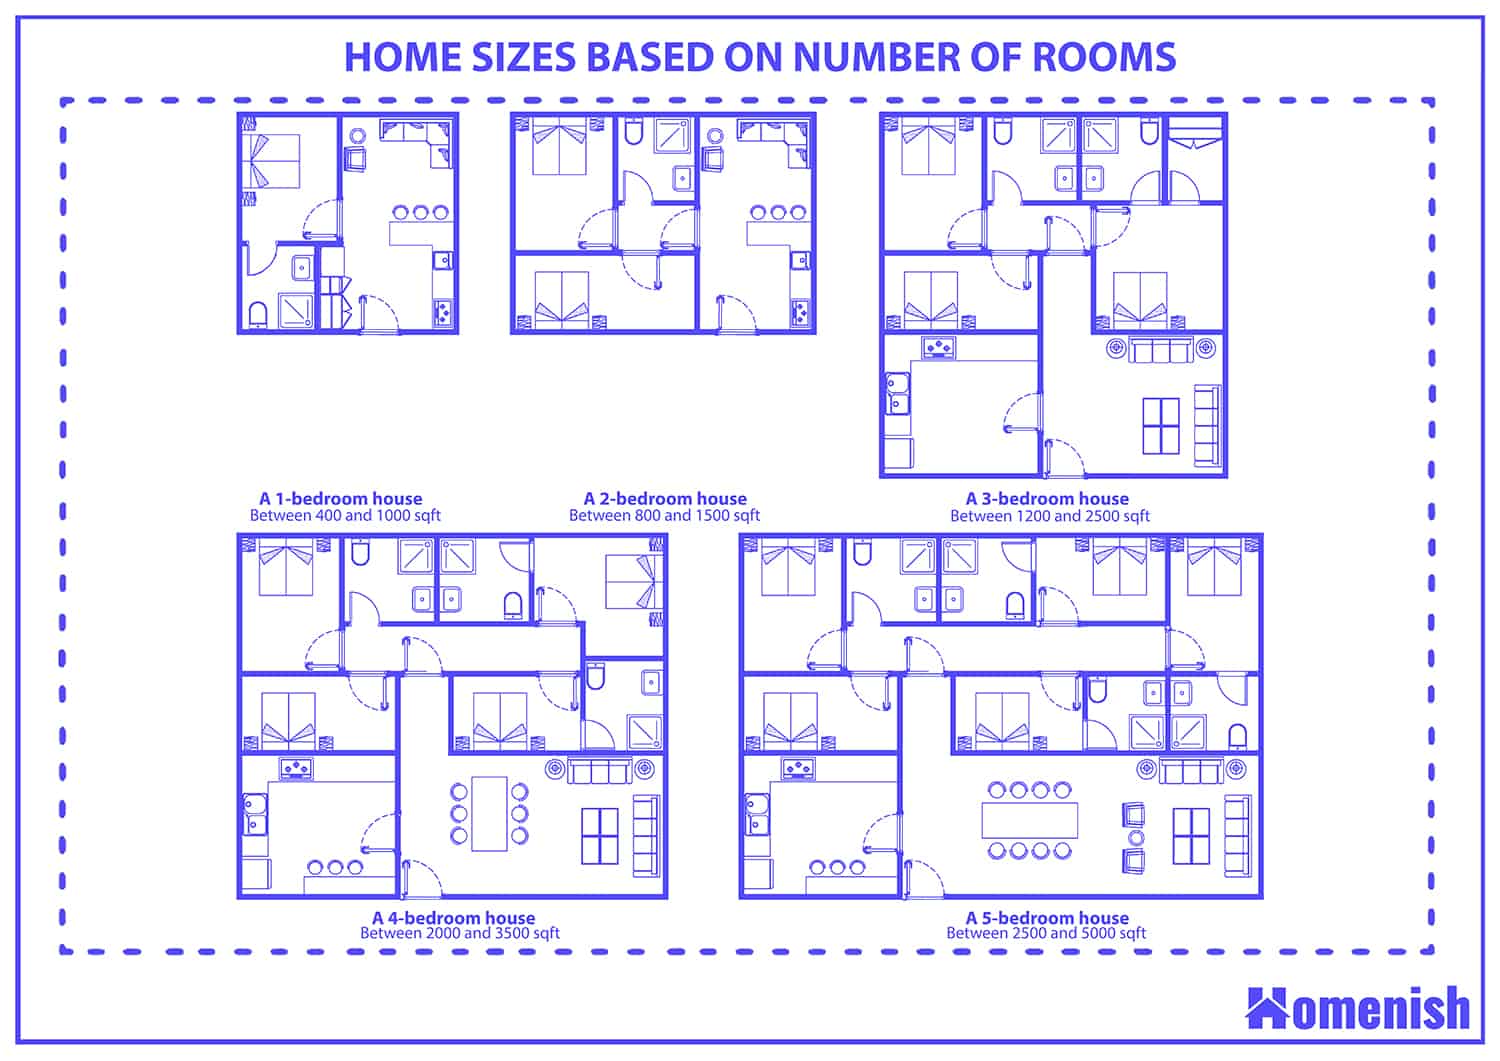 Home sizes based on the number of rooms